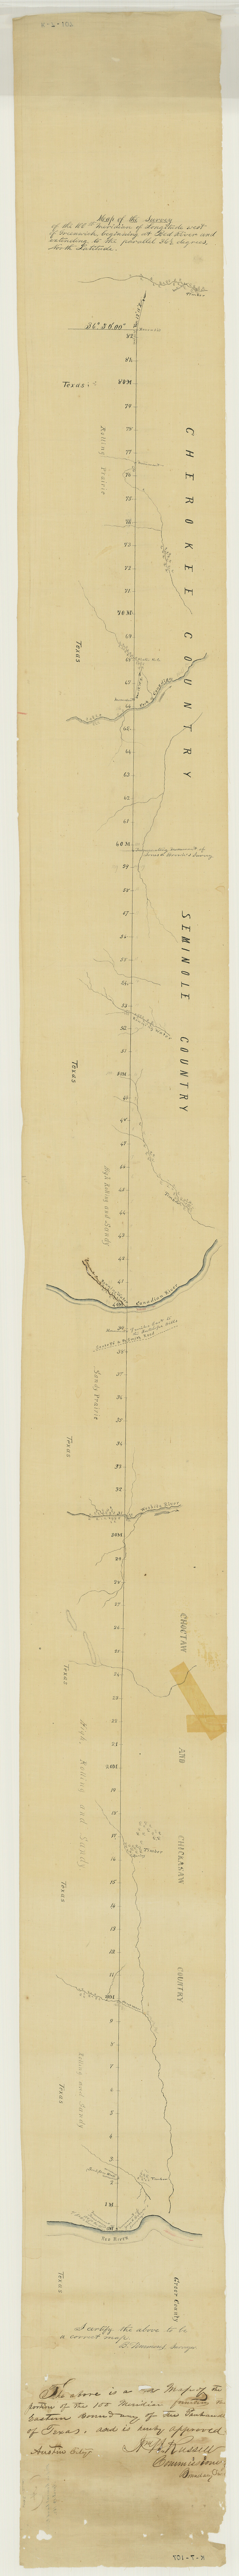 3094, Map of the survey of the 100th Meridian of longitude west of Greenwich beginning at Red River and extending to the parallel 36 1/2 degrees north latitude, General Map Collection